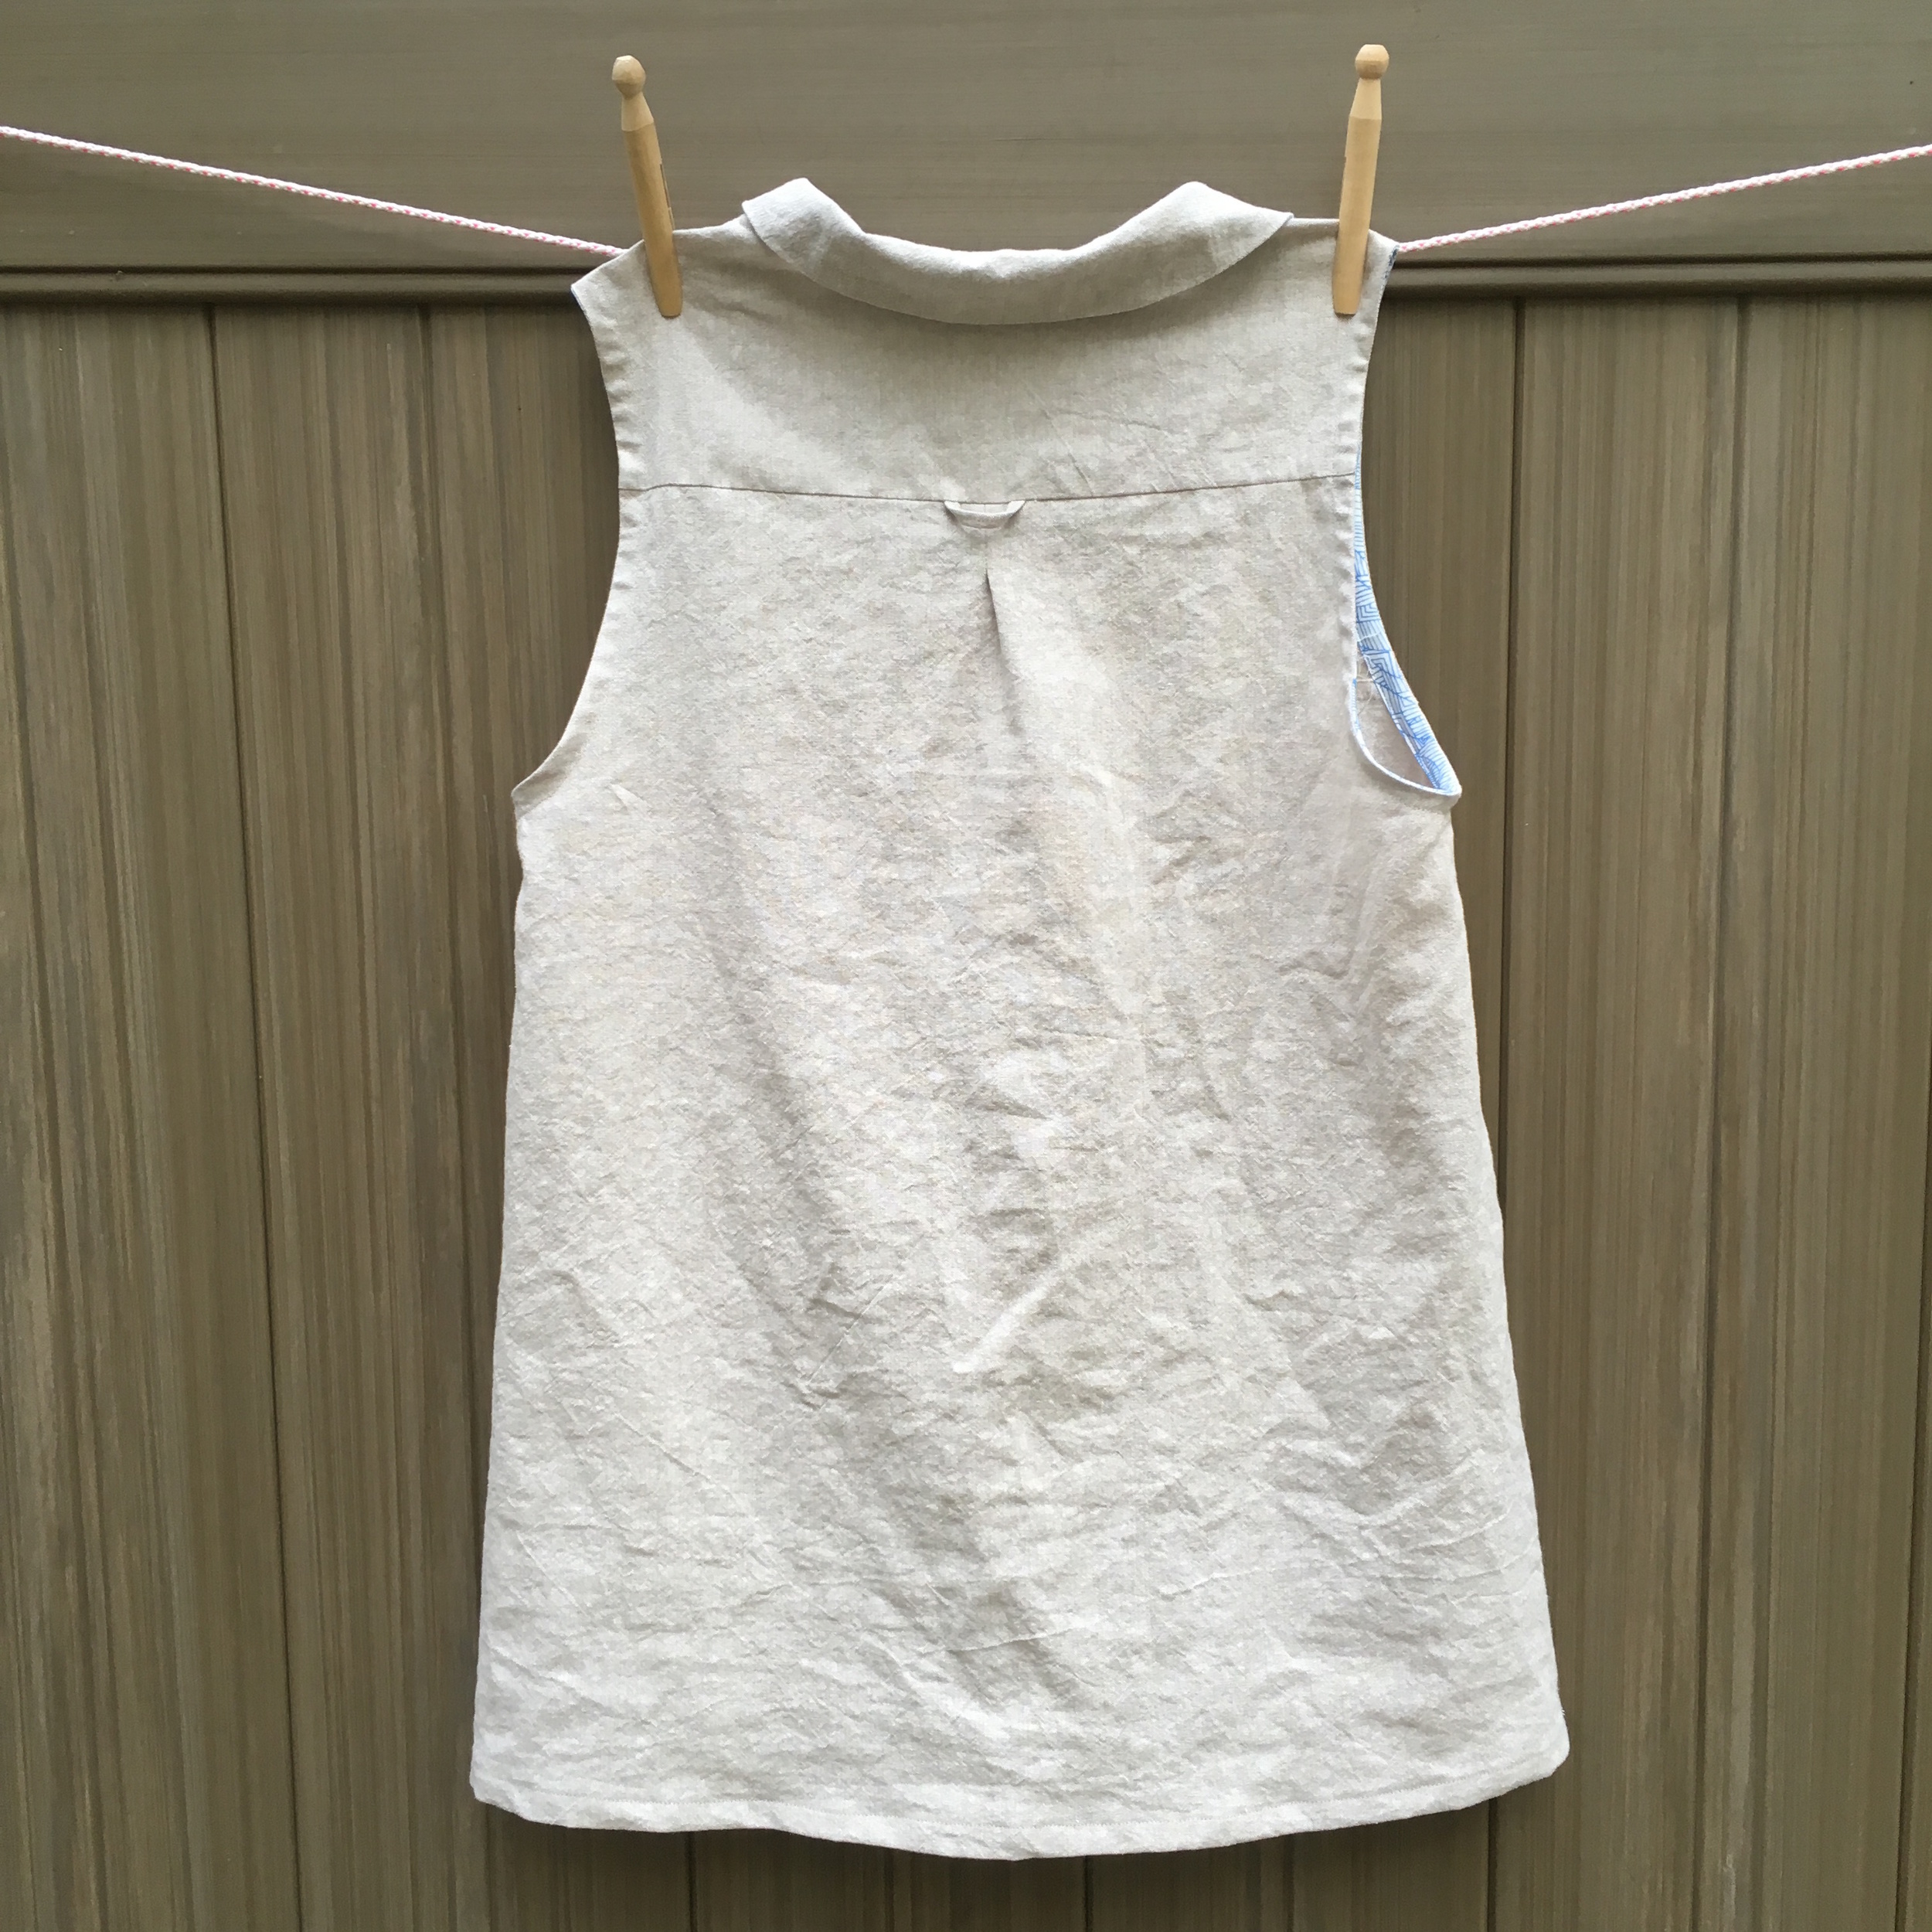 Clothing West Water Tunic back.jpg